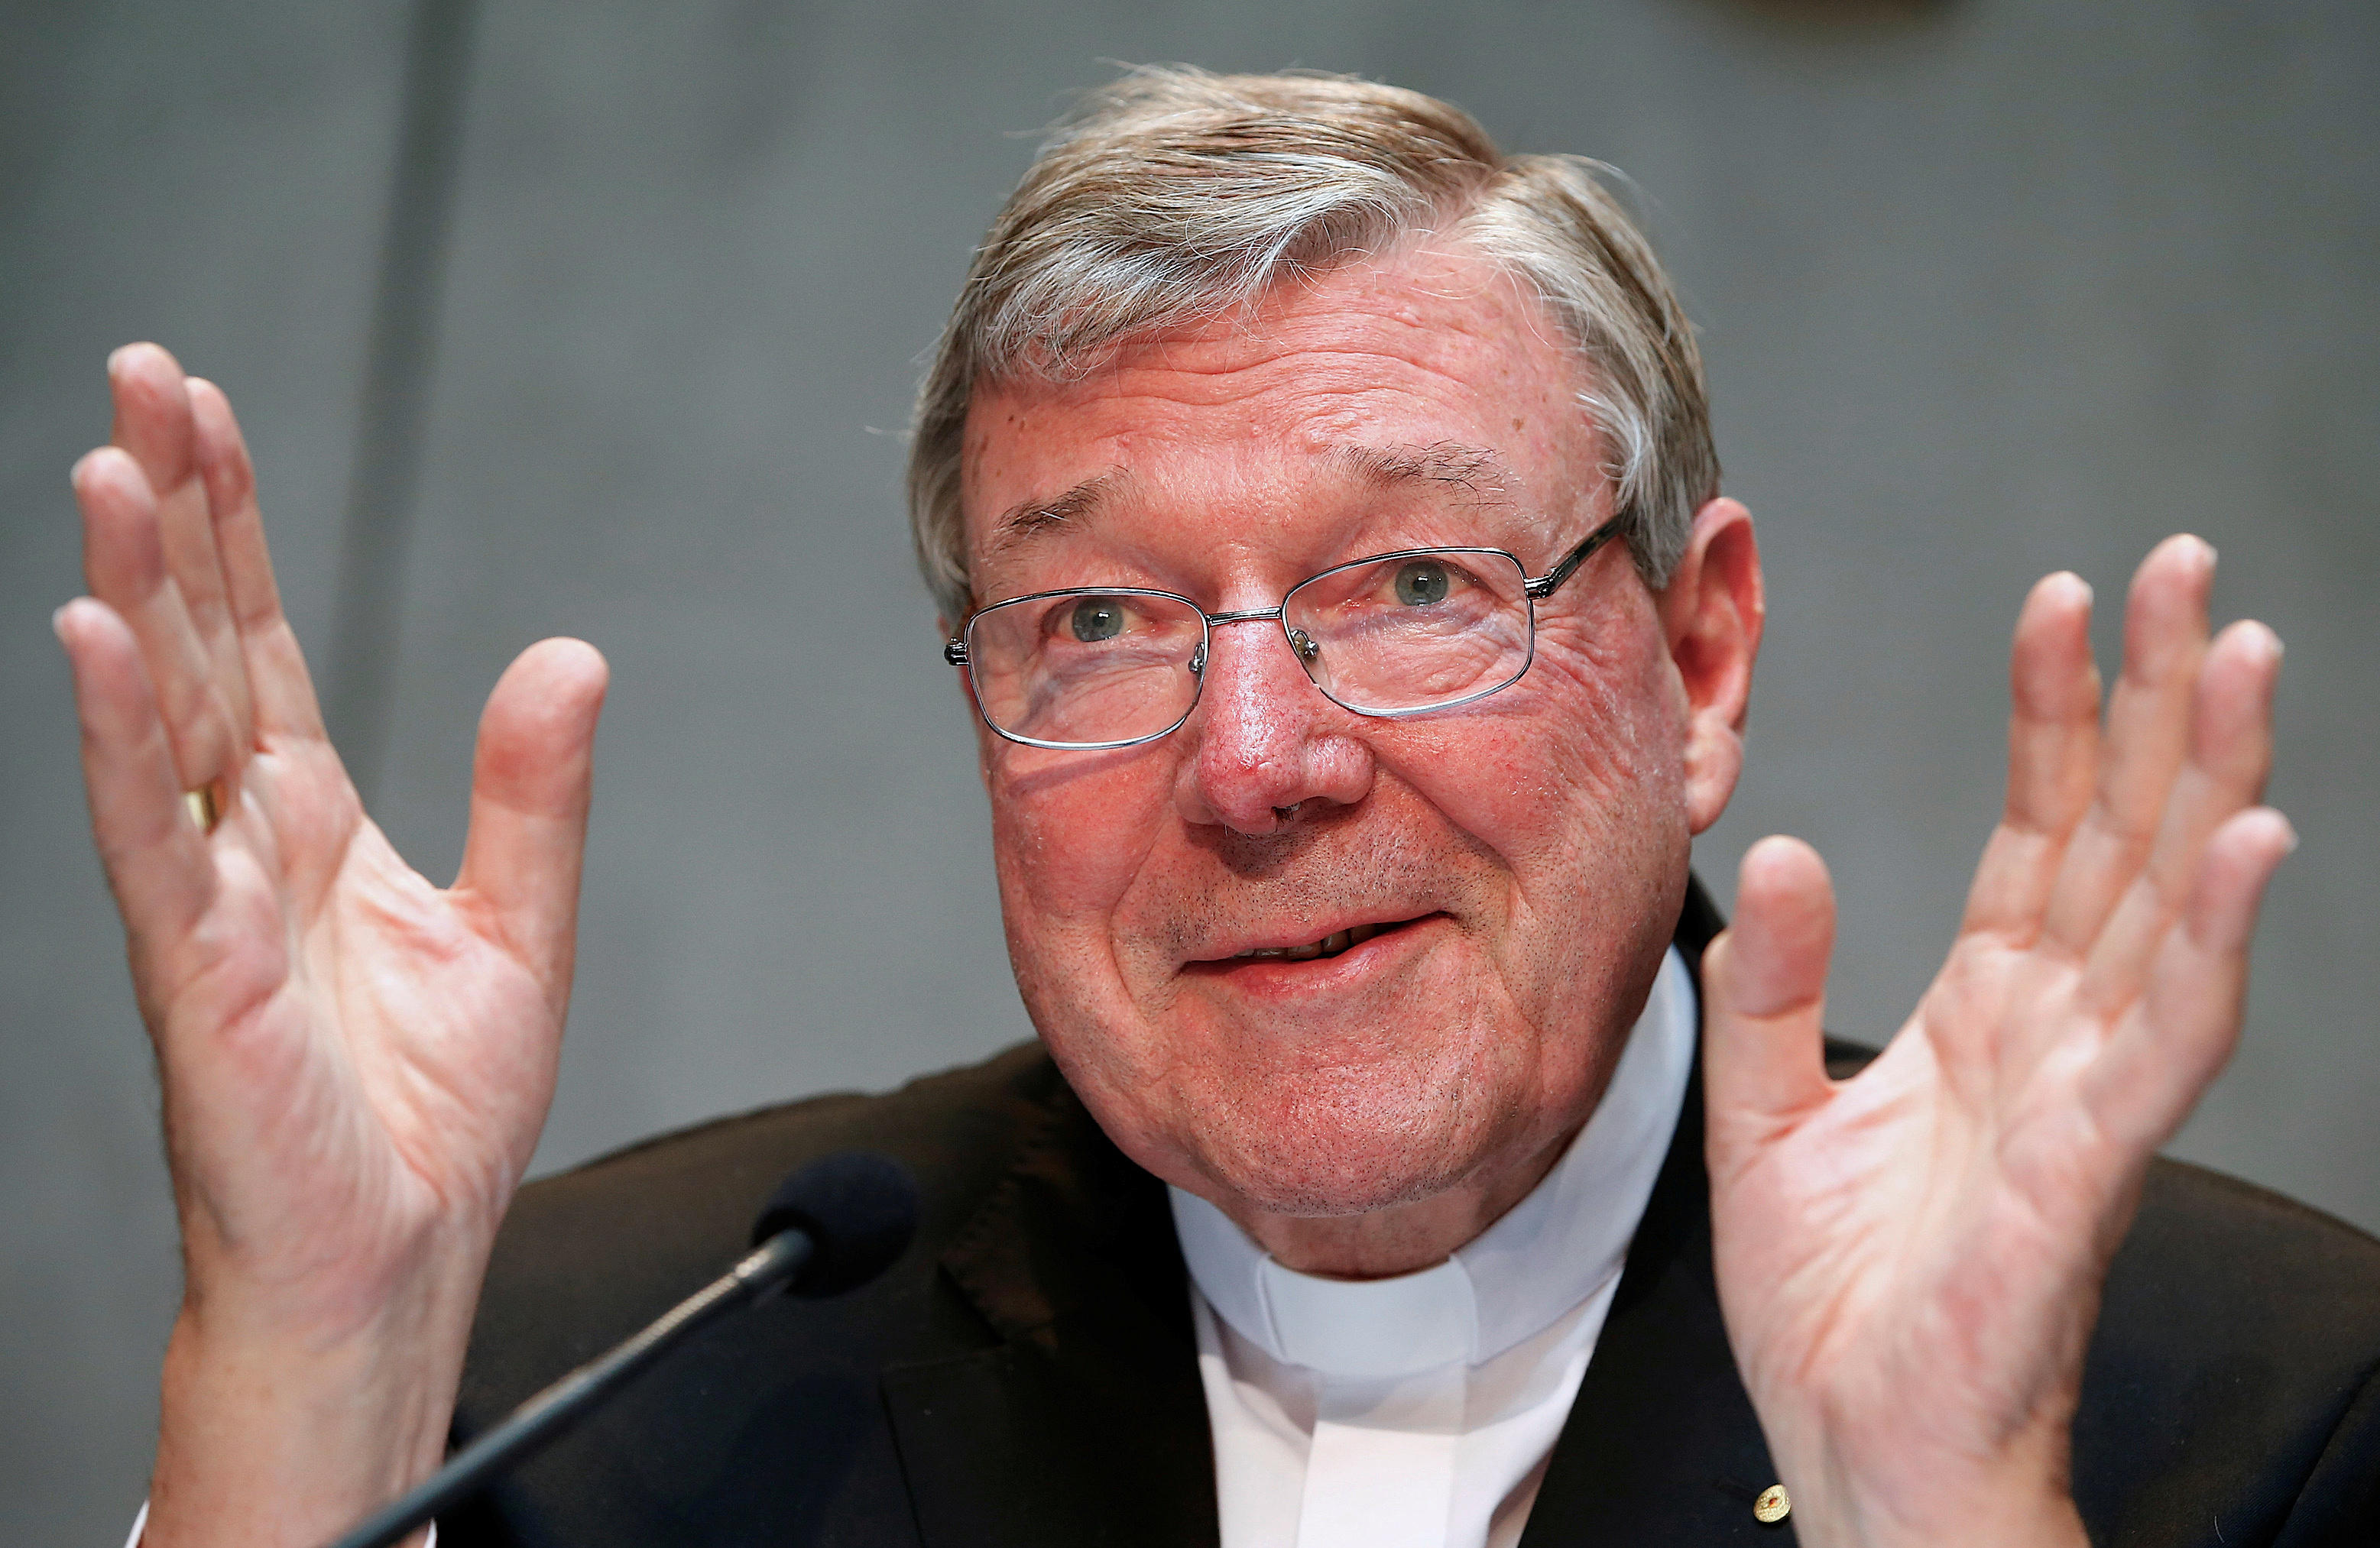 Australia's top Vatican cardinal charged with multiple sex offenses